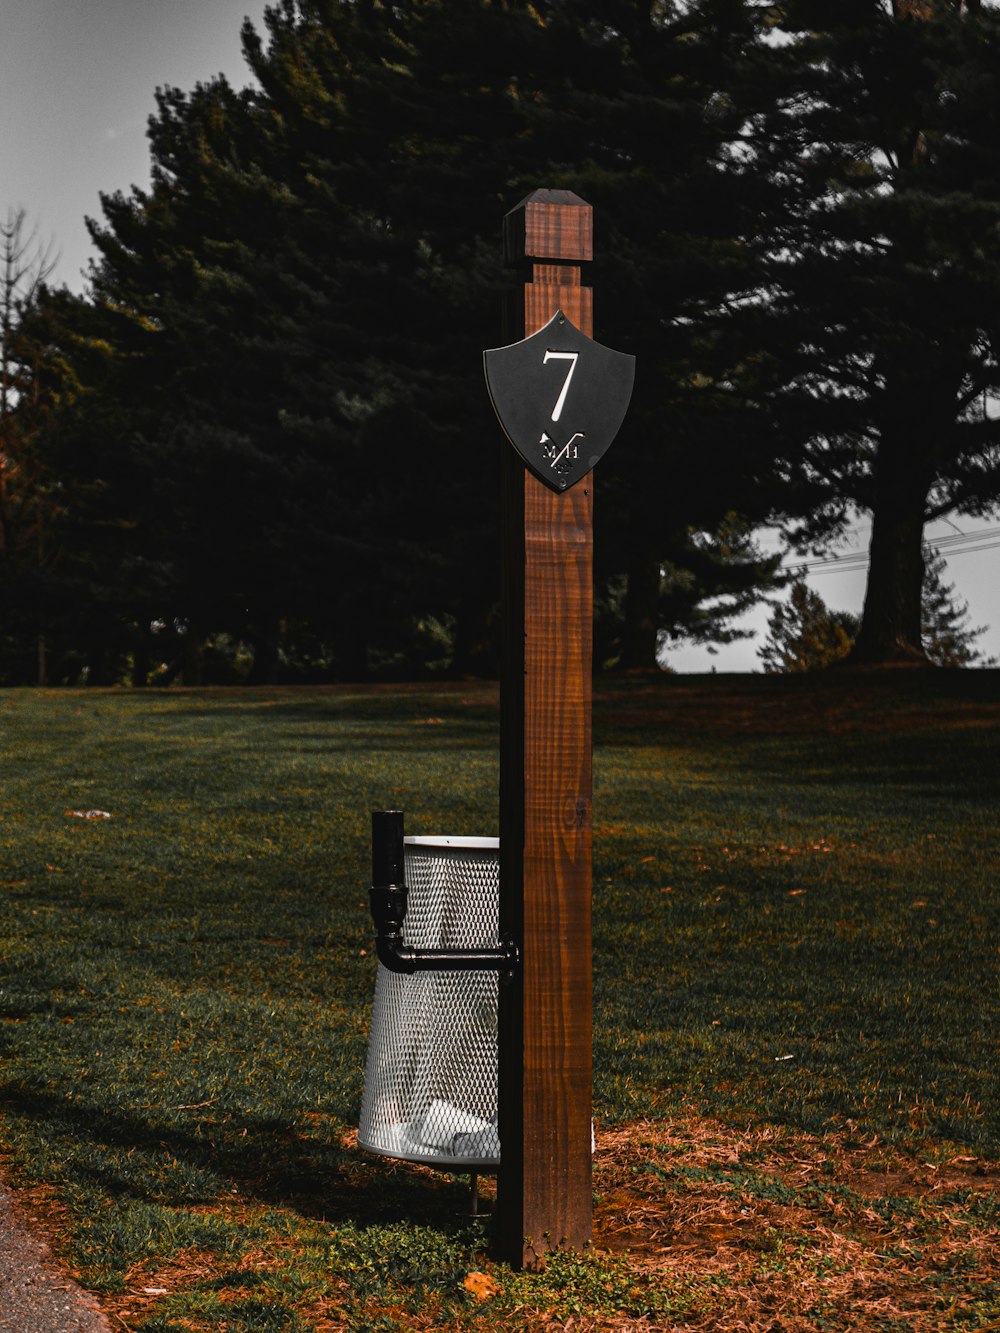 a wooden pole with a clock on top of it